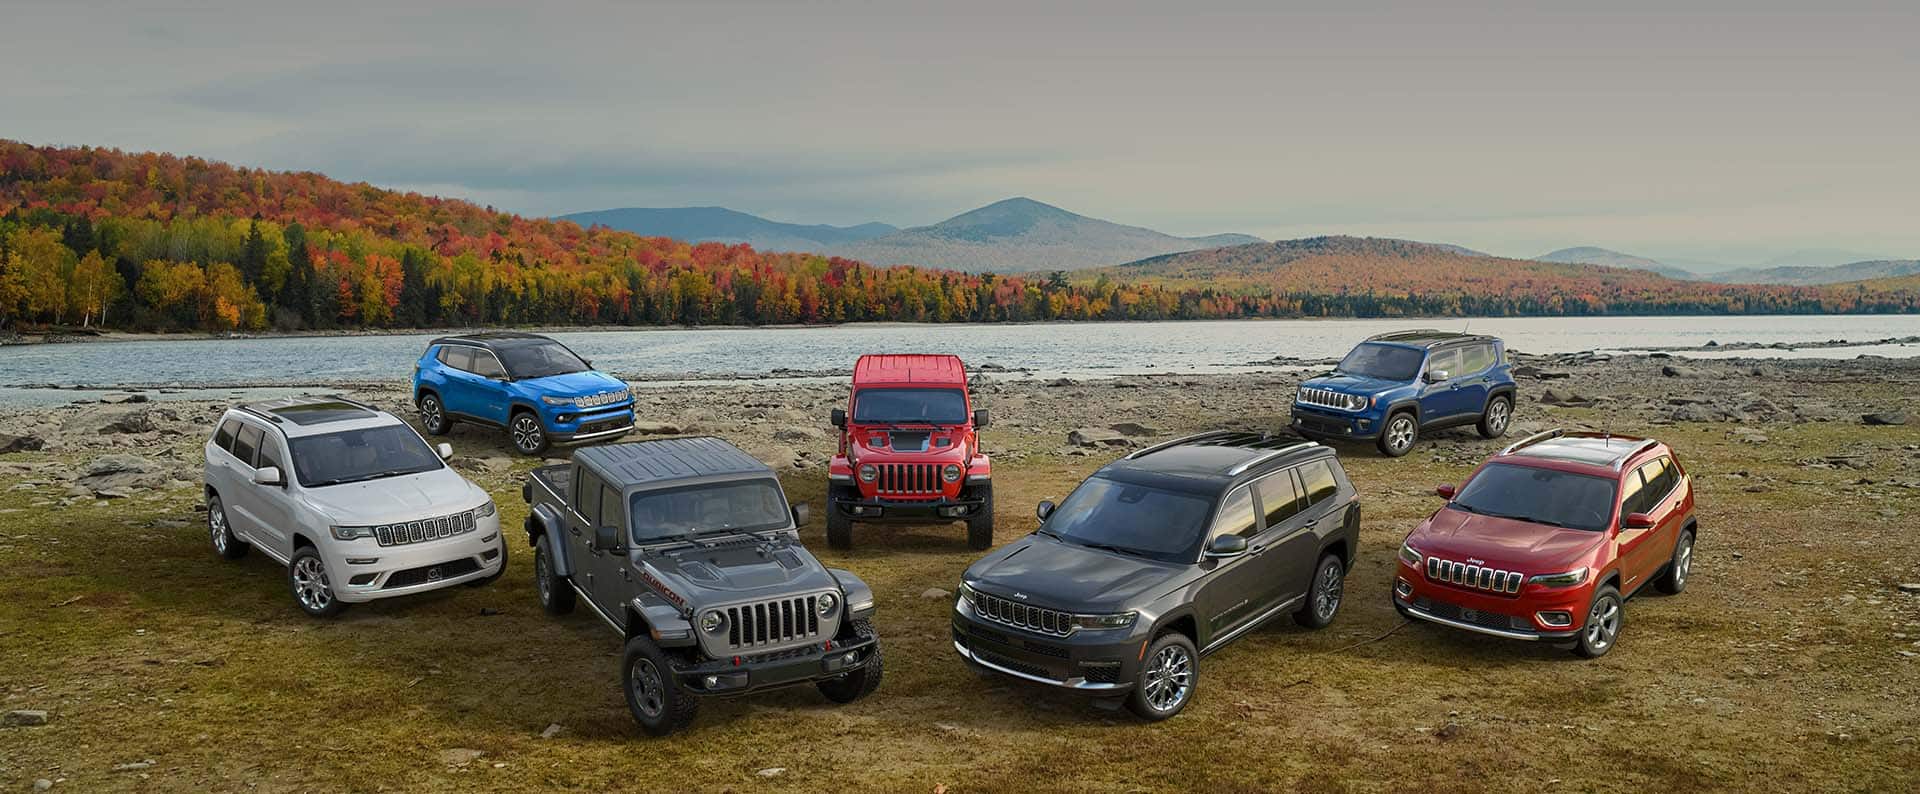 Sports Utility Vehicle | New SUV Buyer's Guide from Jeep®